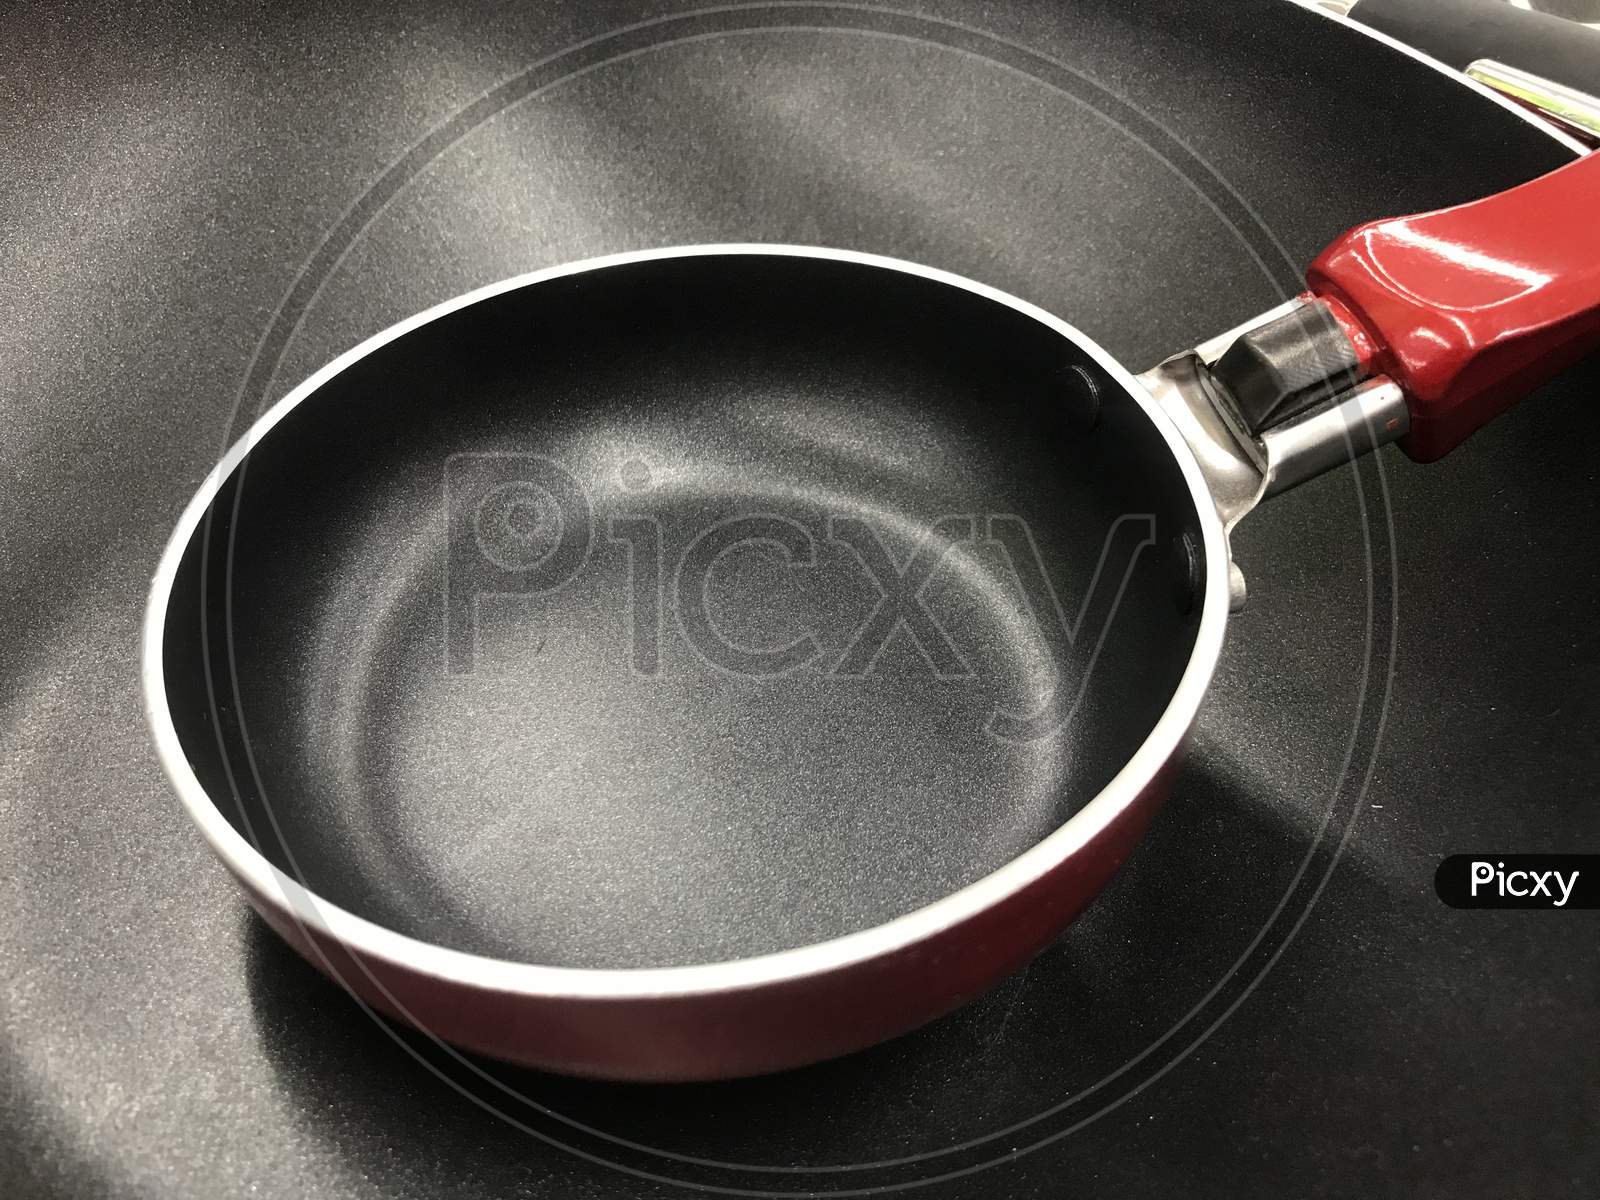 Red Color Handle Round Non Stick Cookware Placed In An Retail Shop In An Utensil And Food Division